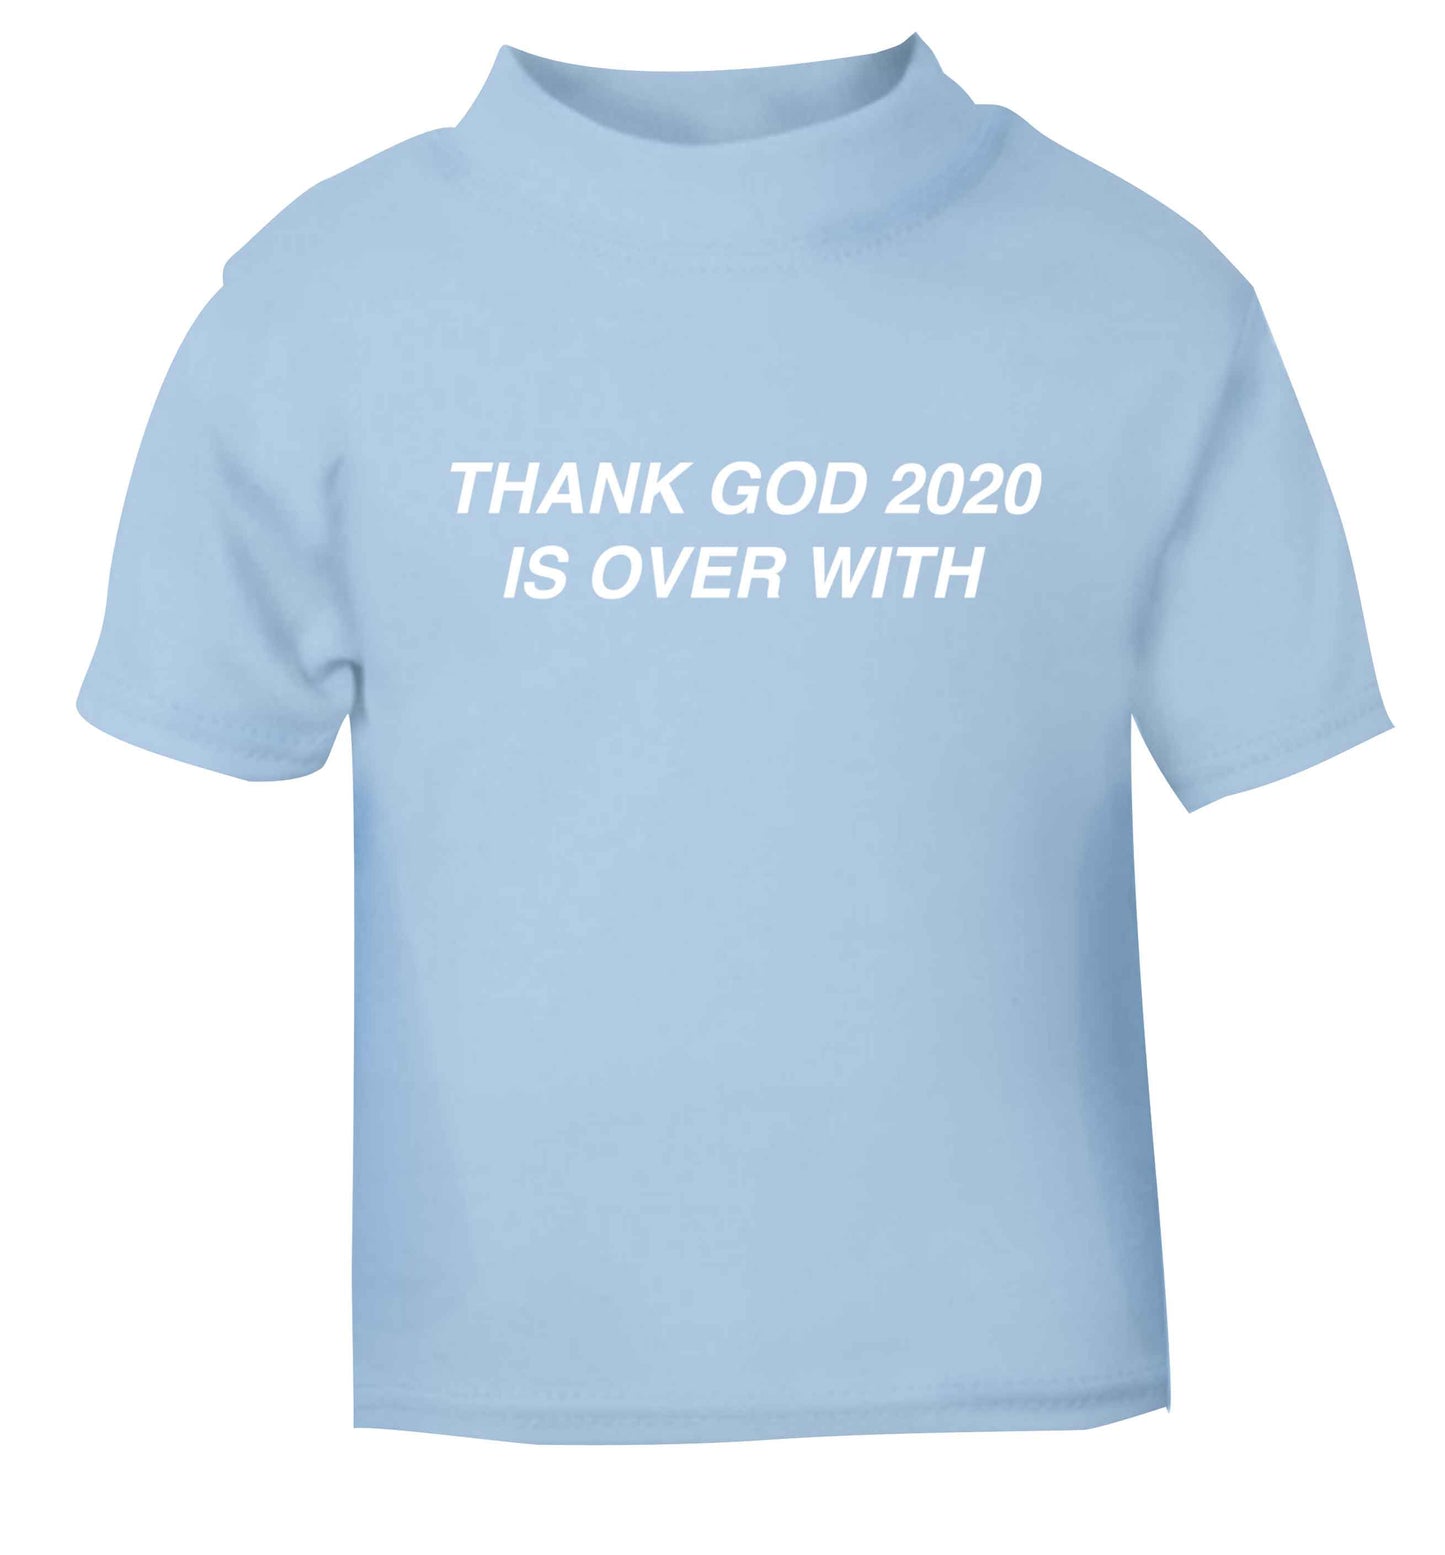 Thank god 2020 is over with light blue baby toddler Tshirt 2 Years